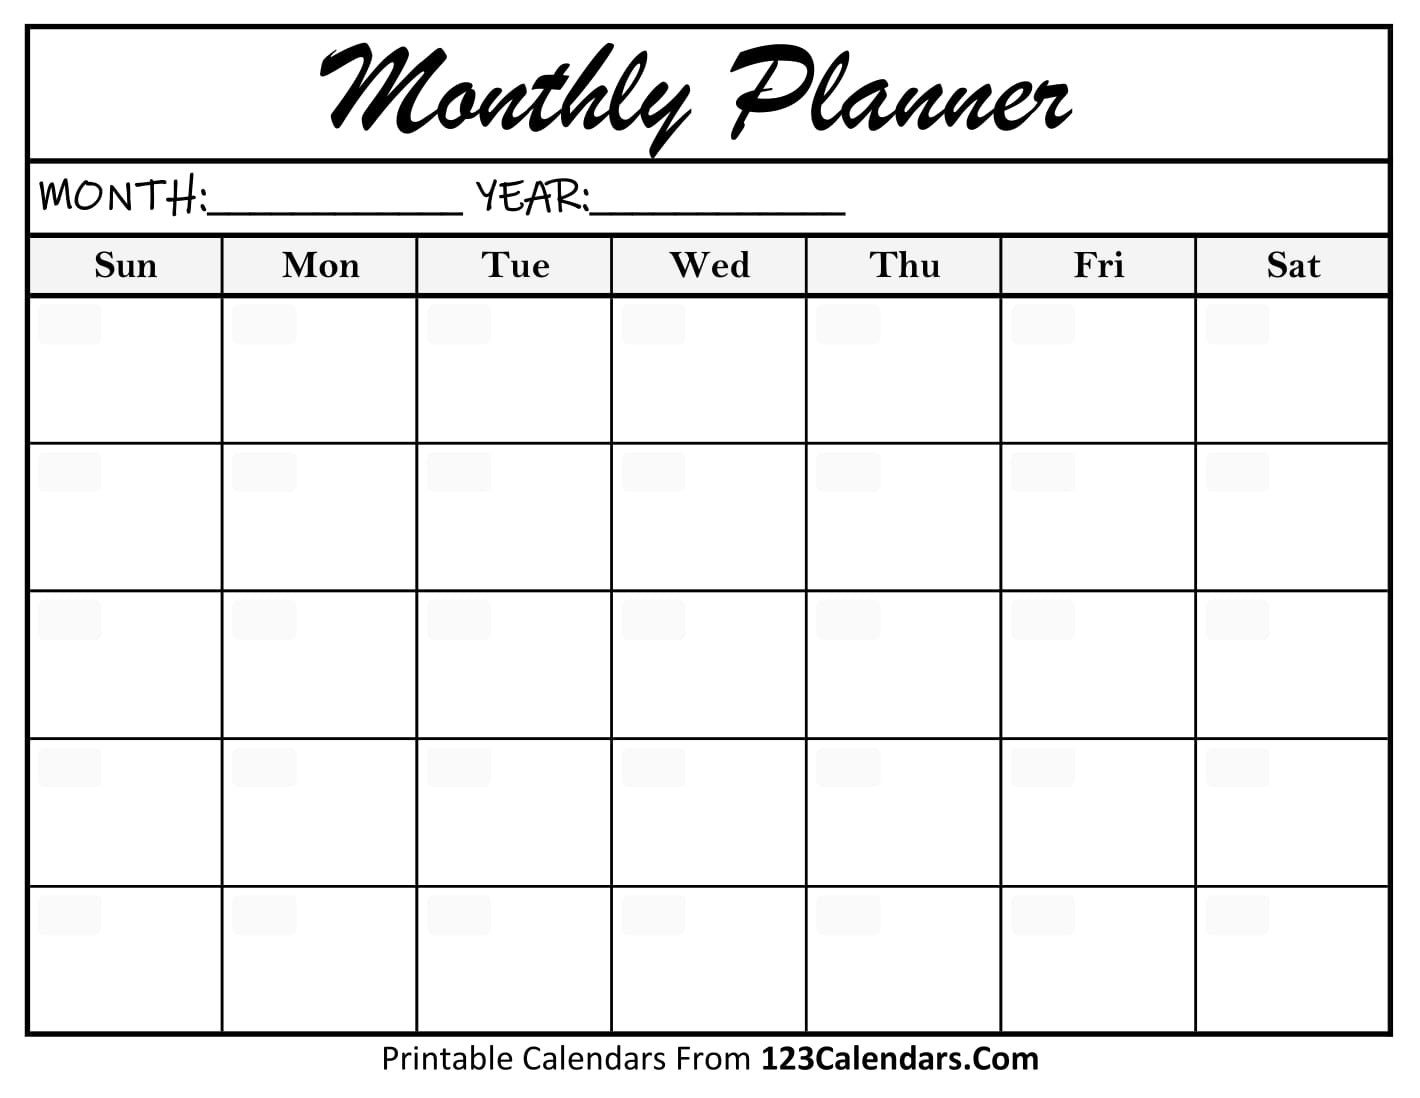 2-page-monthly-planner-template-example-calendar-printable